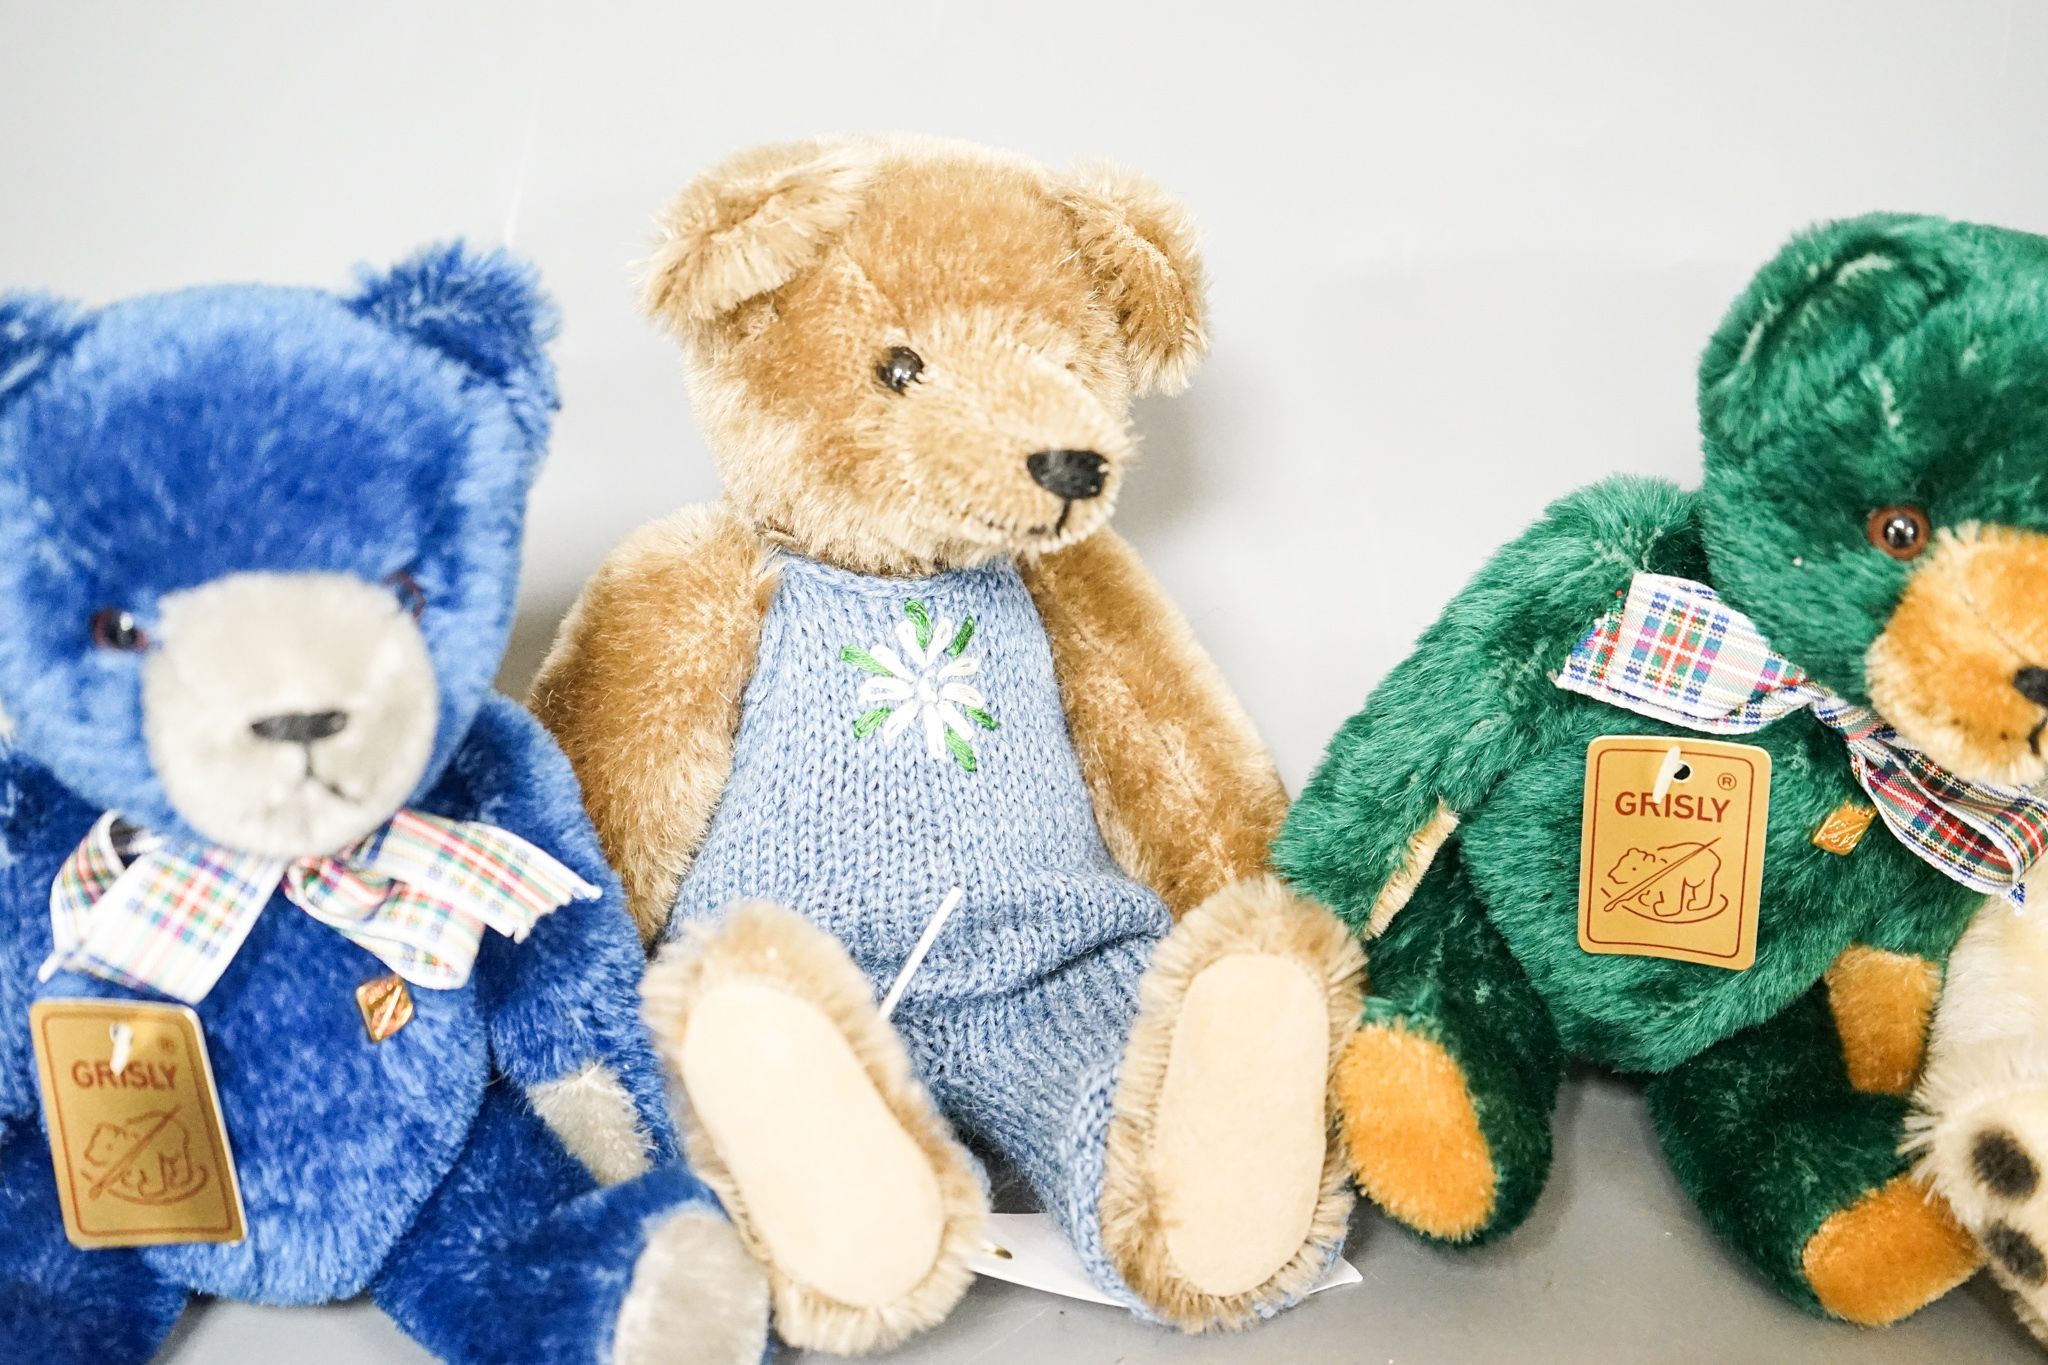 Four Grisly Bears Mohair collection